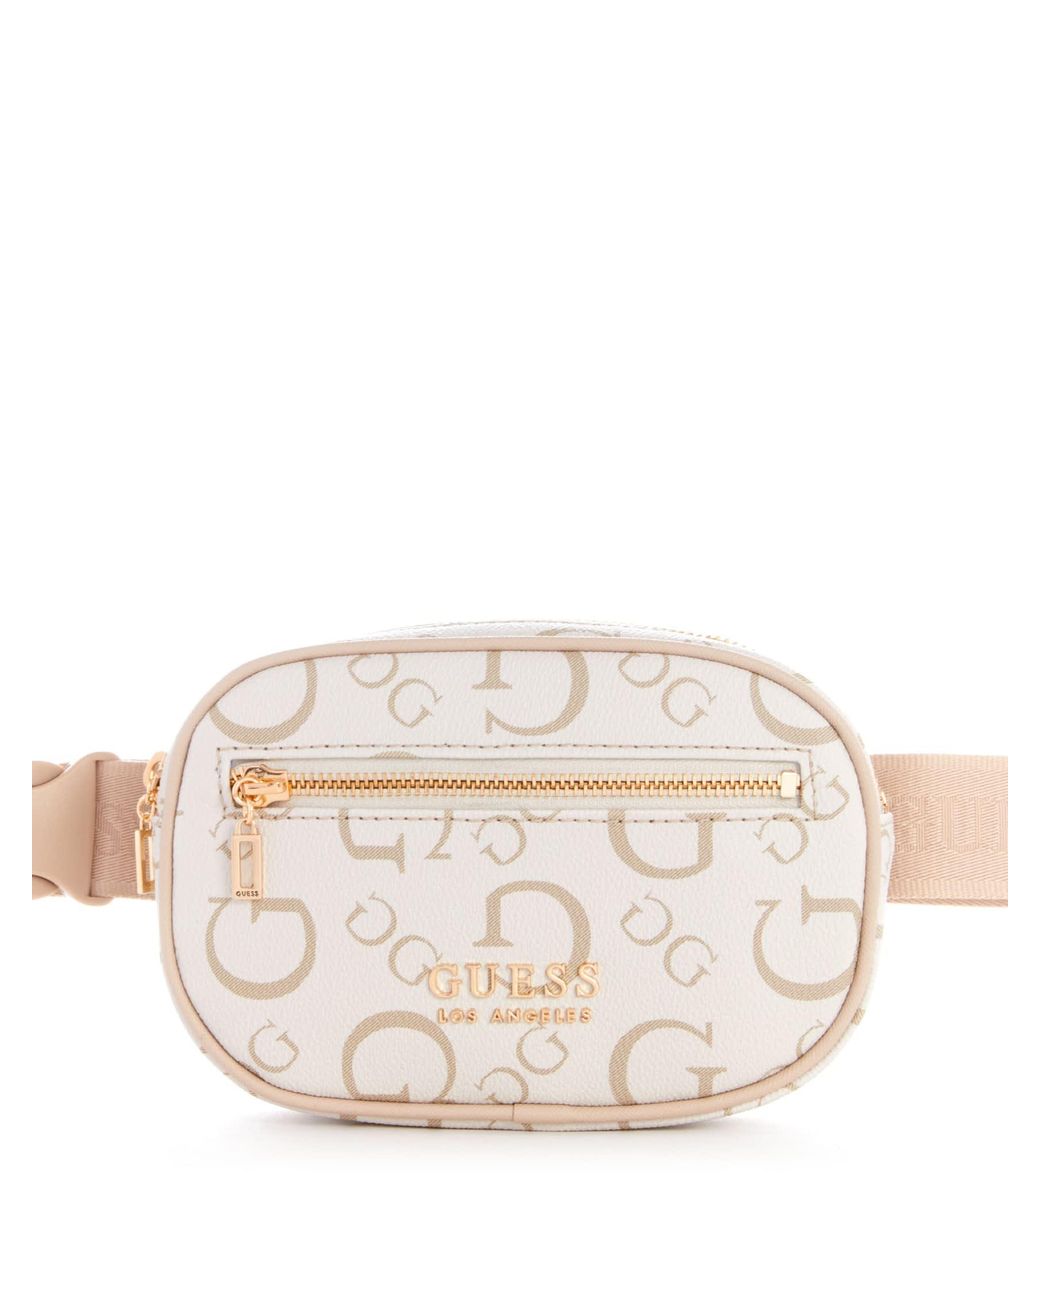 Guess Factory Luella G Logo Fanny Pack in White | Lyst